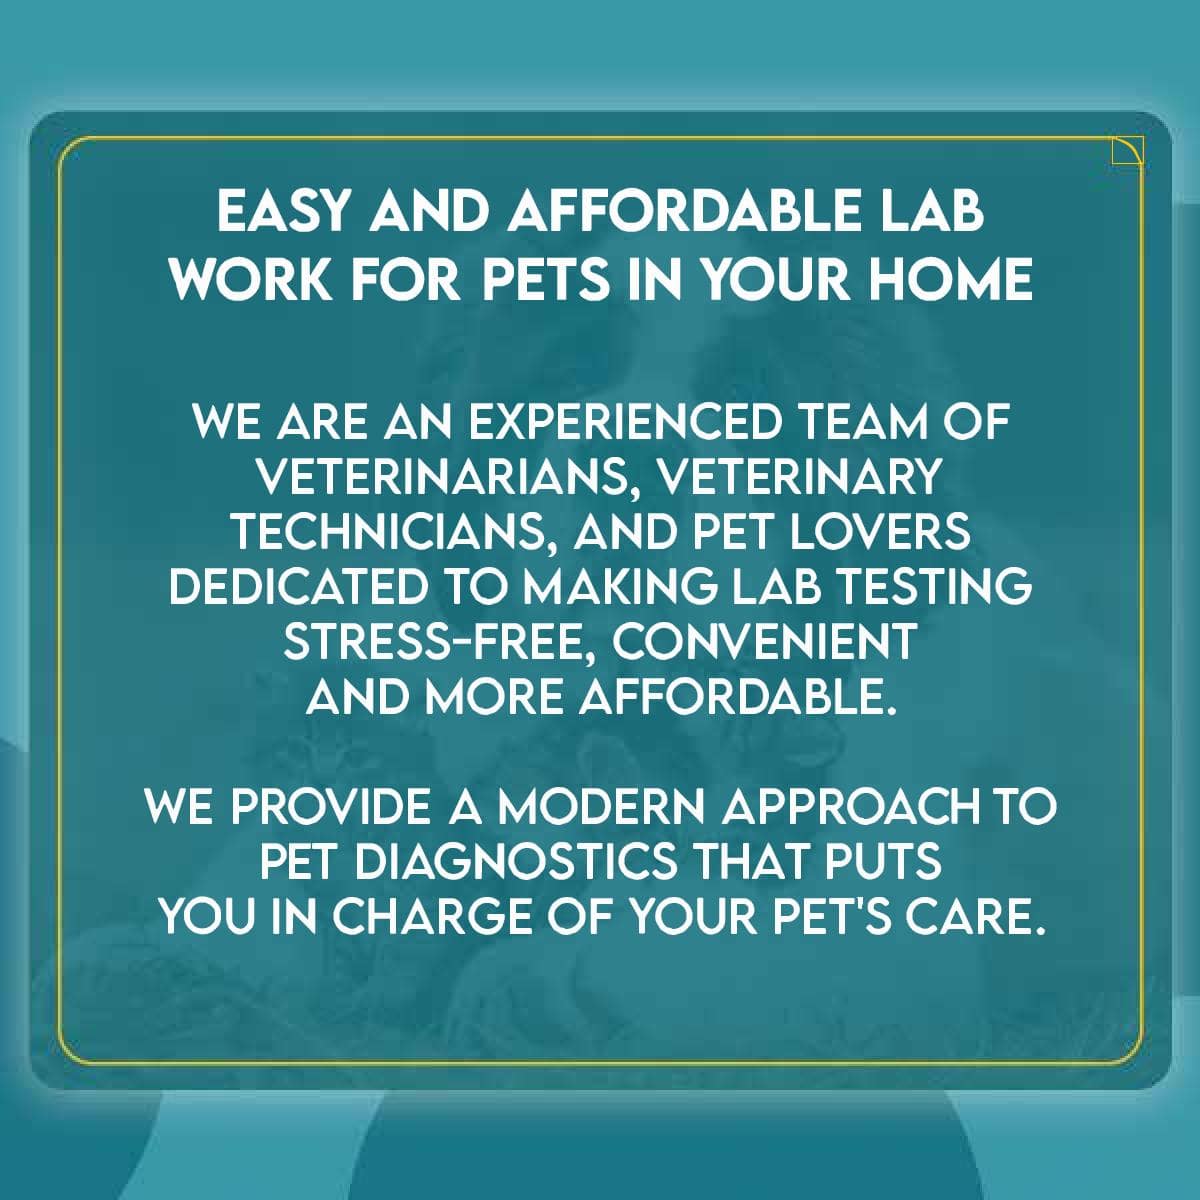 Total Fecal Tests Plus Giardia For Cats